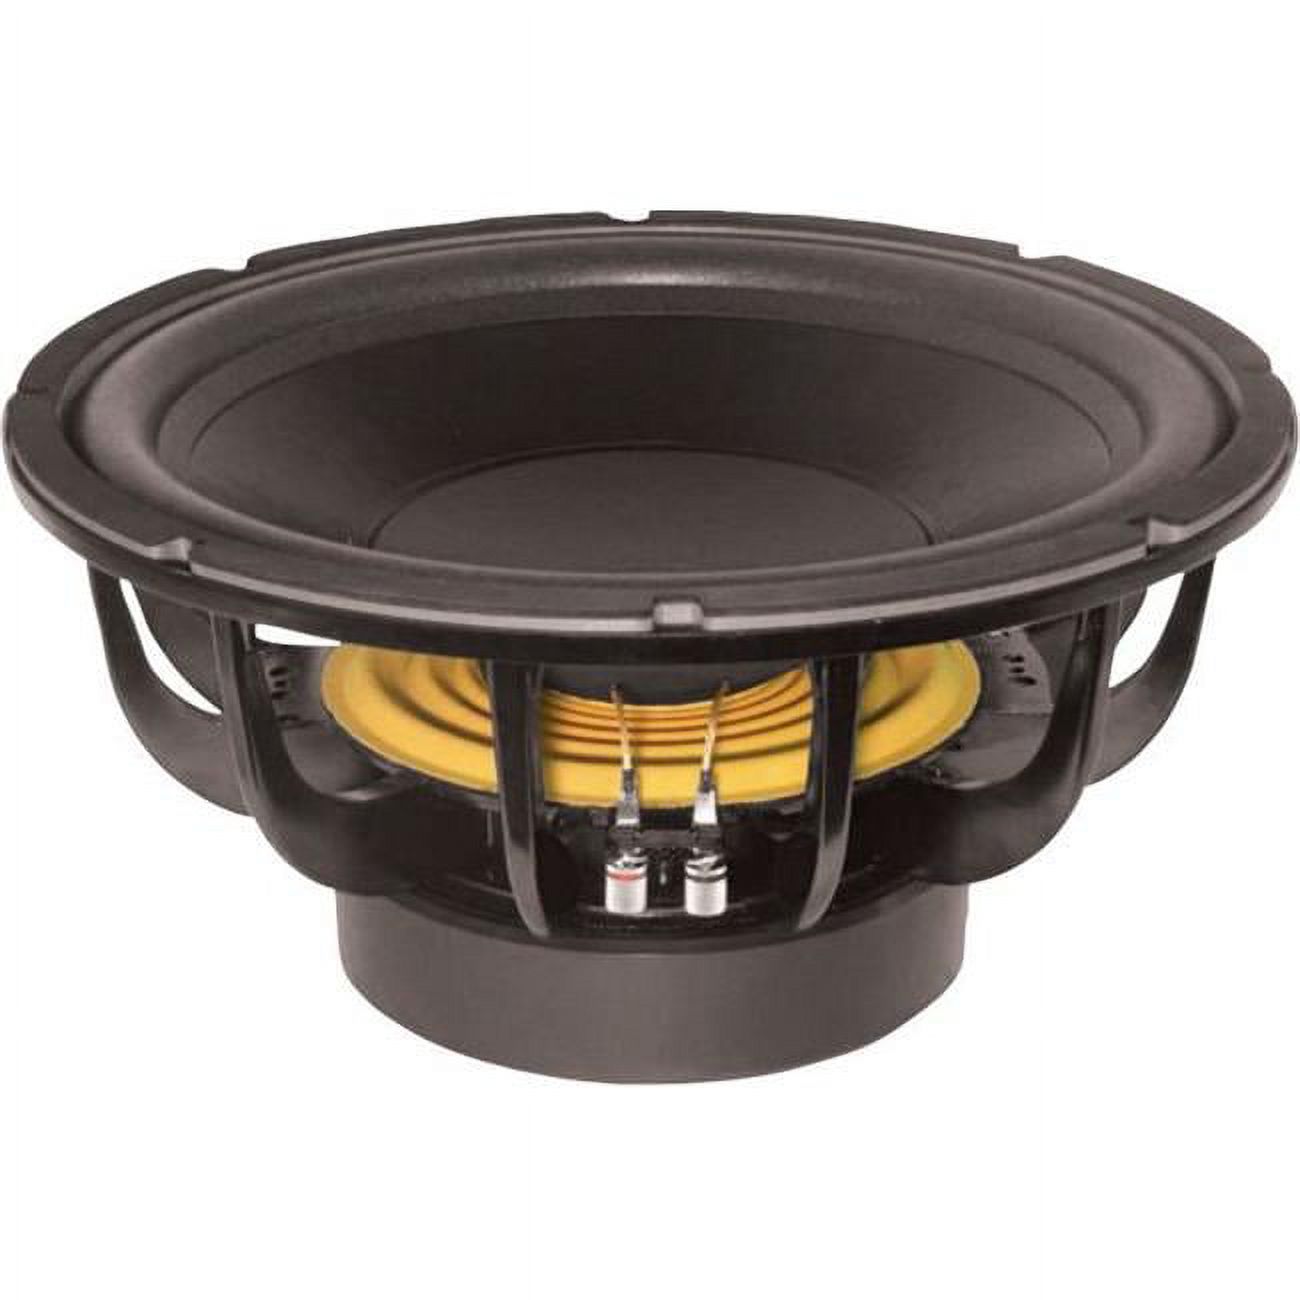 Eminence Professional LAB15 Woofer - 600 W RMS/1200 W PMPO - 20 Hz to 120 Hz - 6 Ohm - 15.34" - image 1 of 2